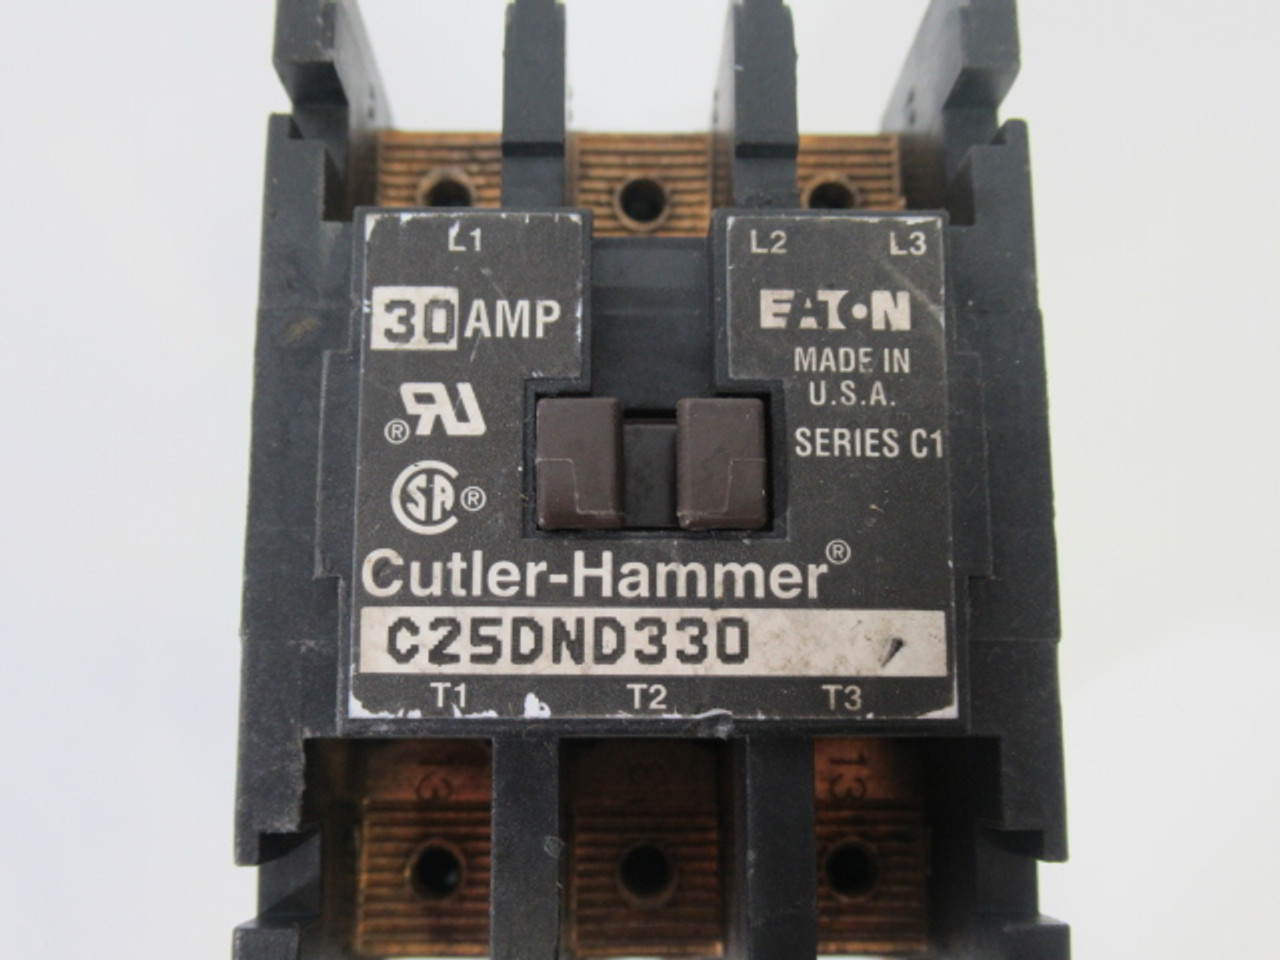 Eaton Cutler-Hammer C25DND330 Contactor 30A MISSING SCREWS Series C1 USED